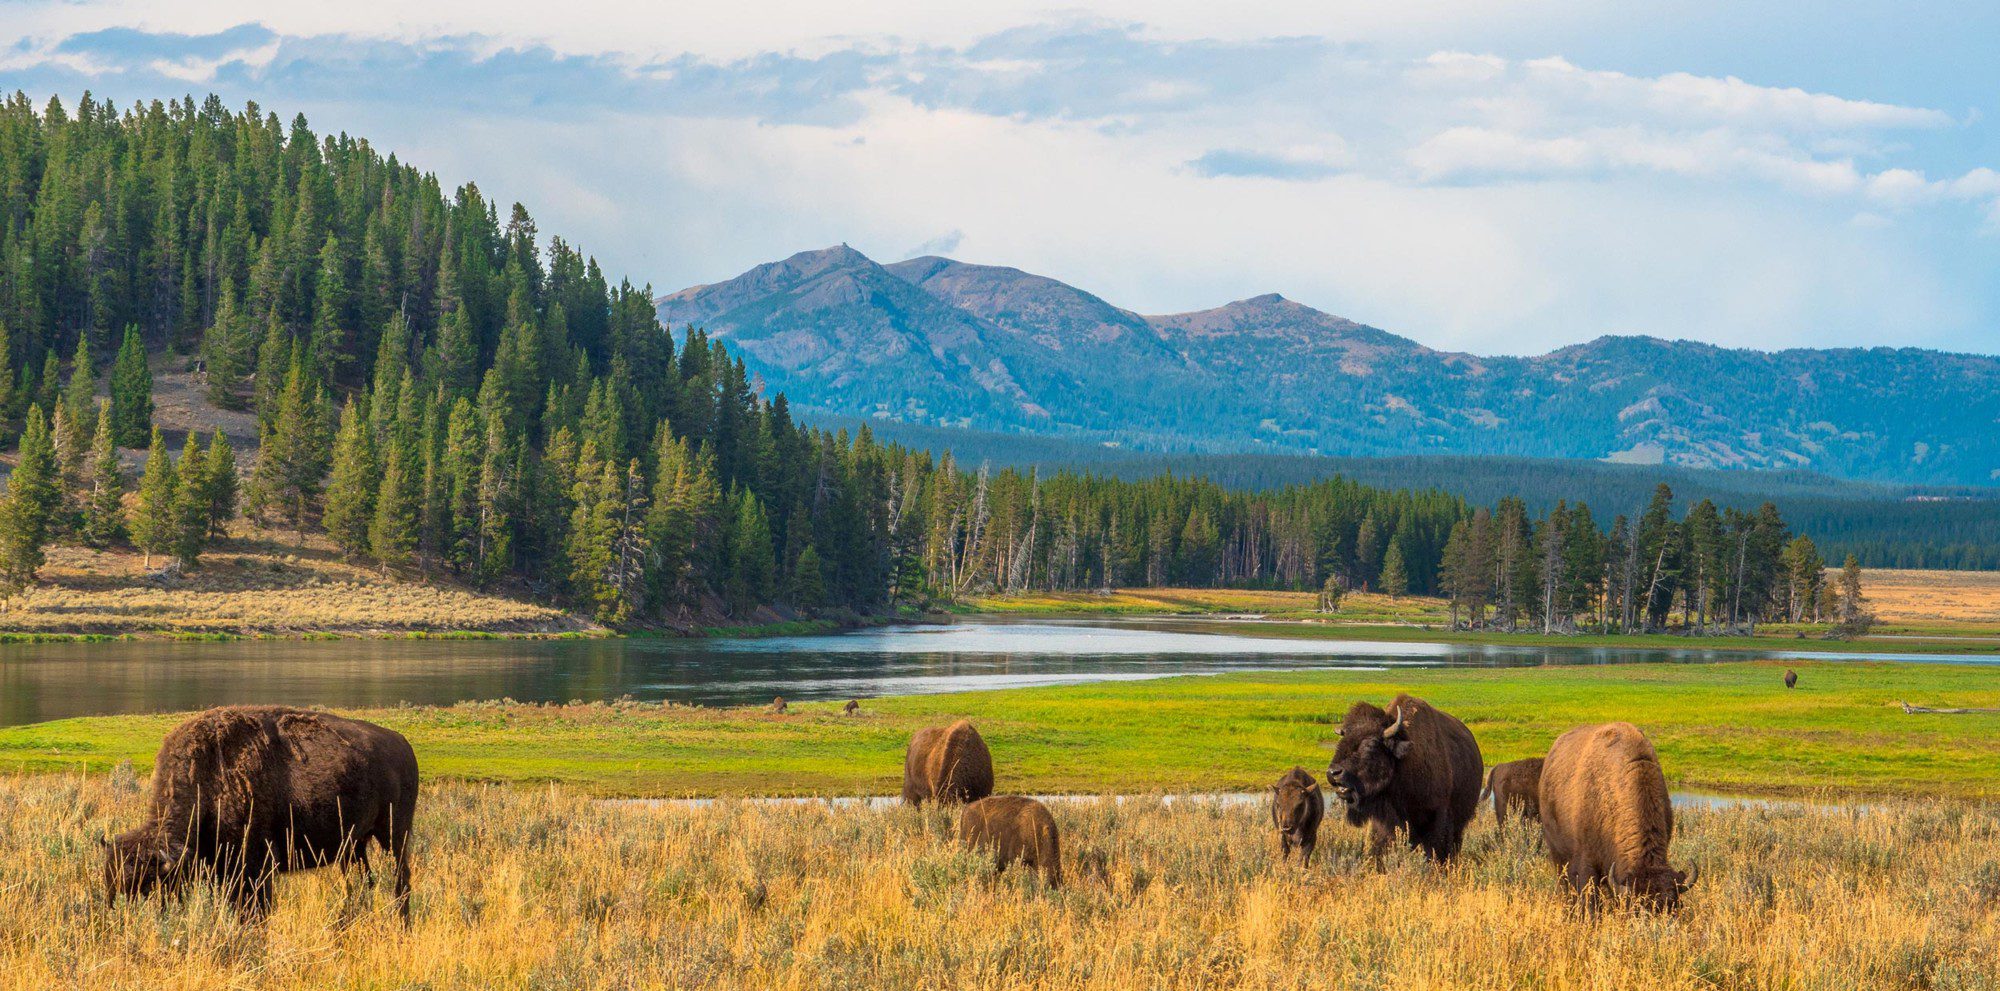 Bison in Yellowstone-National-Park-Wyoming